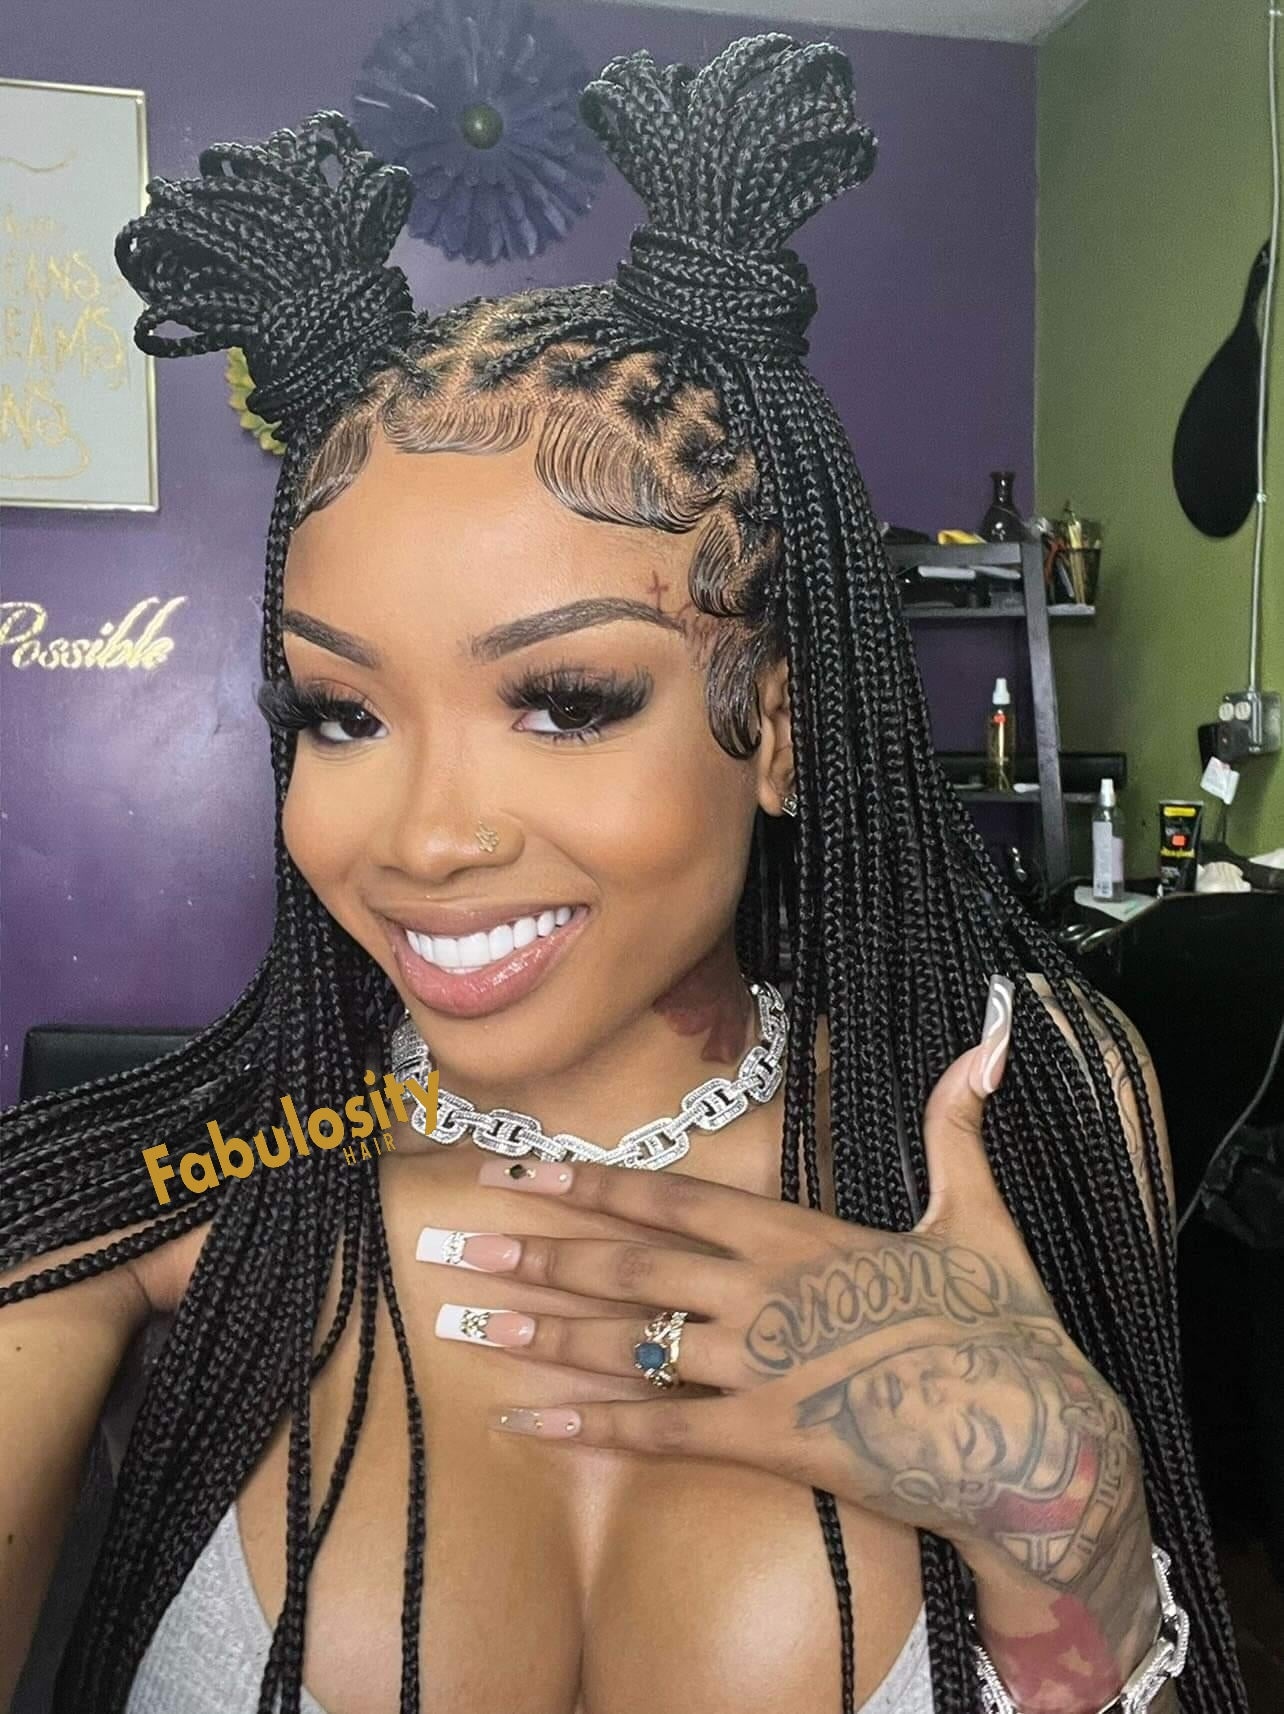 Knotless Braided wig